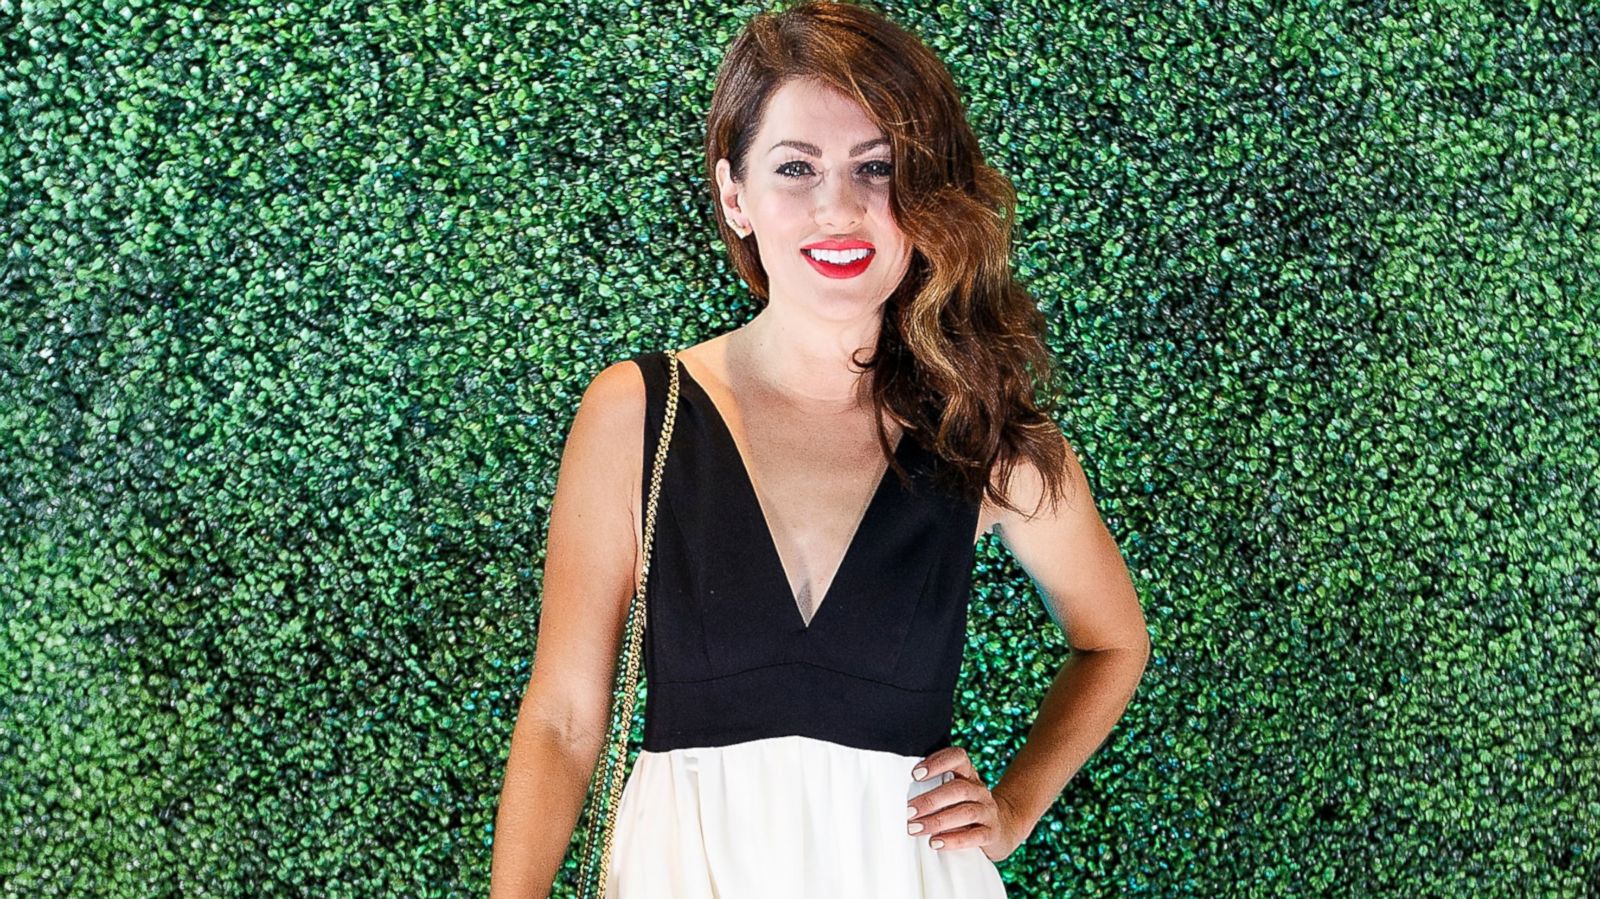 Vancouver's Bachelorette Jillian Harris makes her final decision  Georgia  Straight Vancouver's source for arts, culture, and events